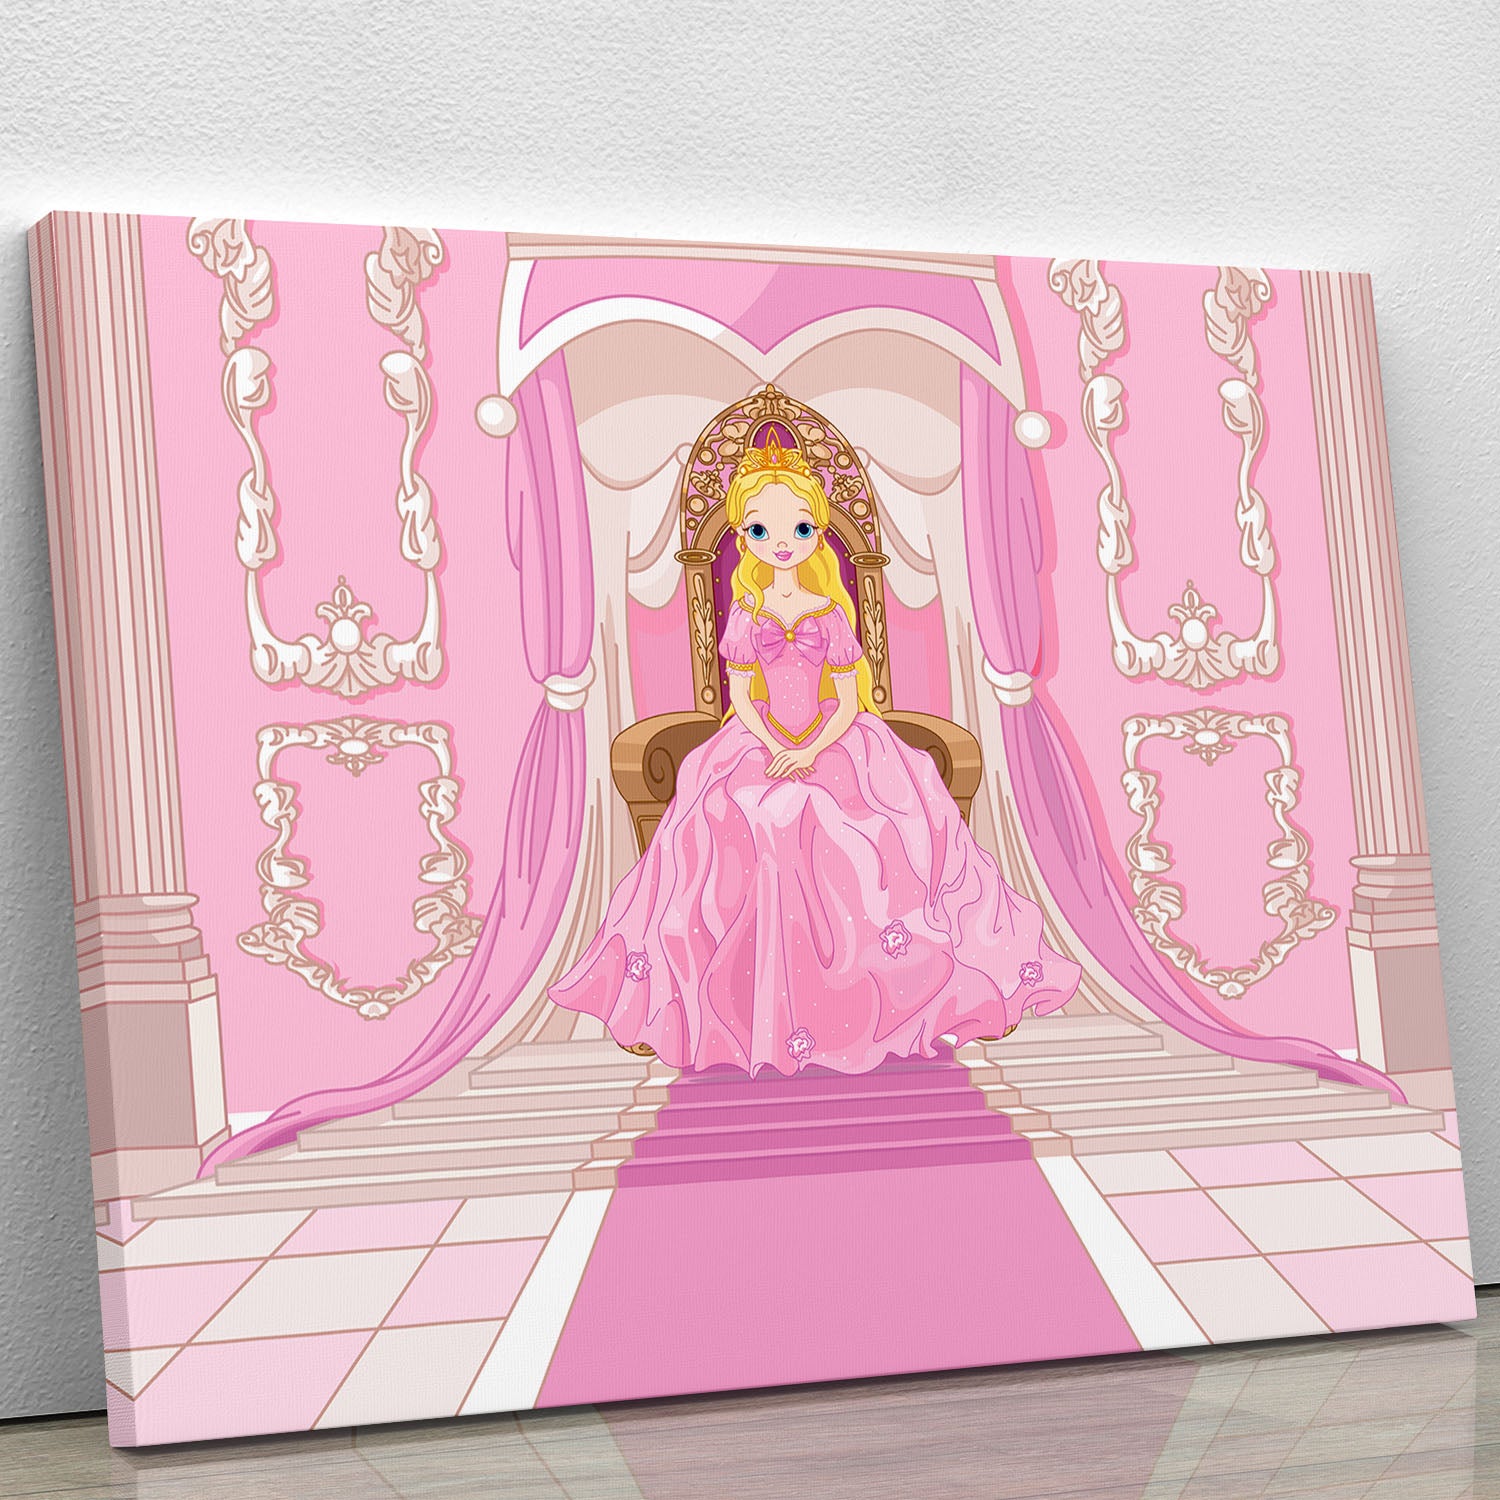 Charming Princess sits on a throne Canvas Print or Poster - Canvas Art Rocks - 1